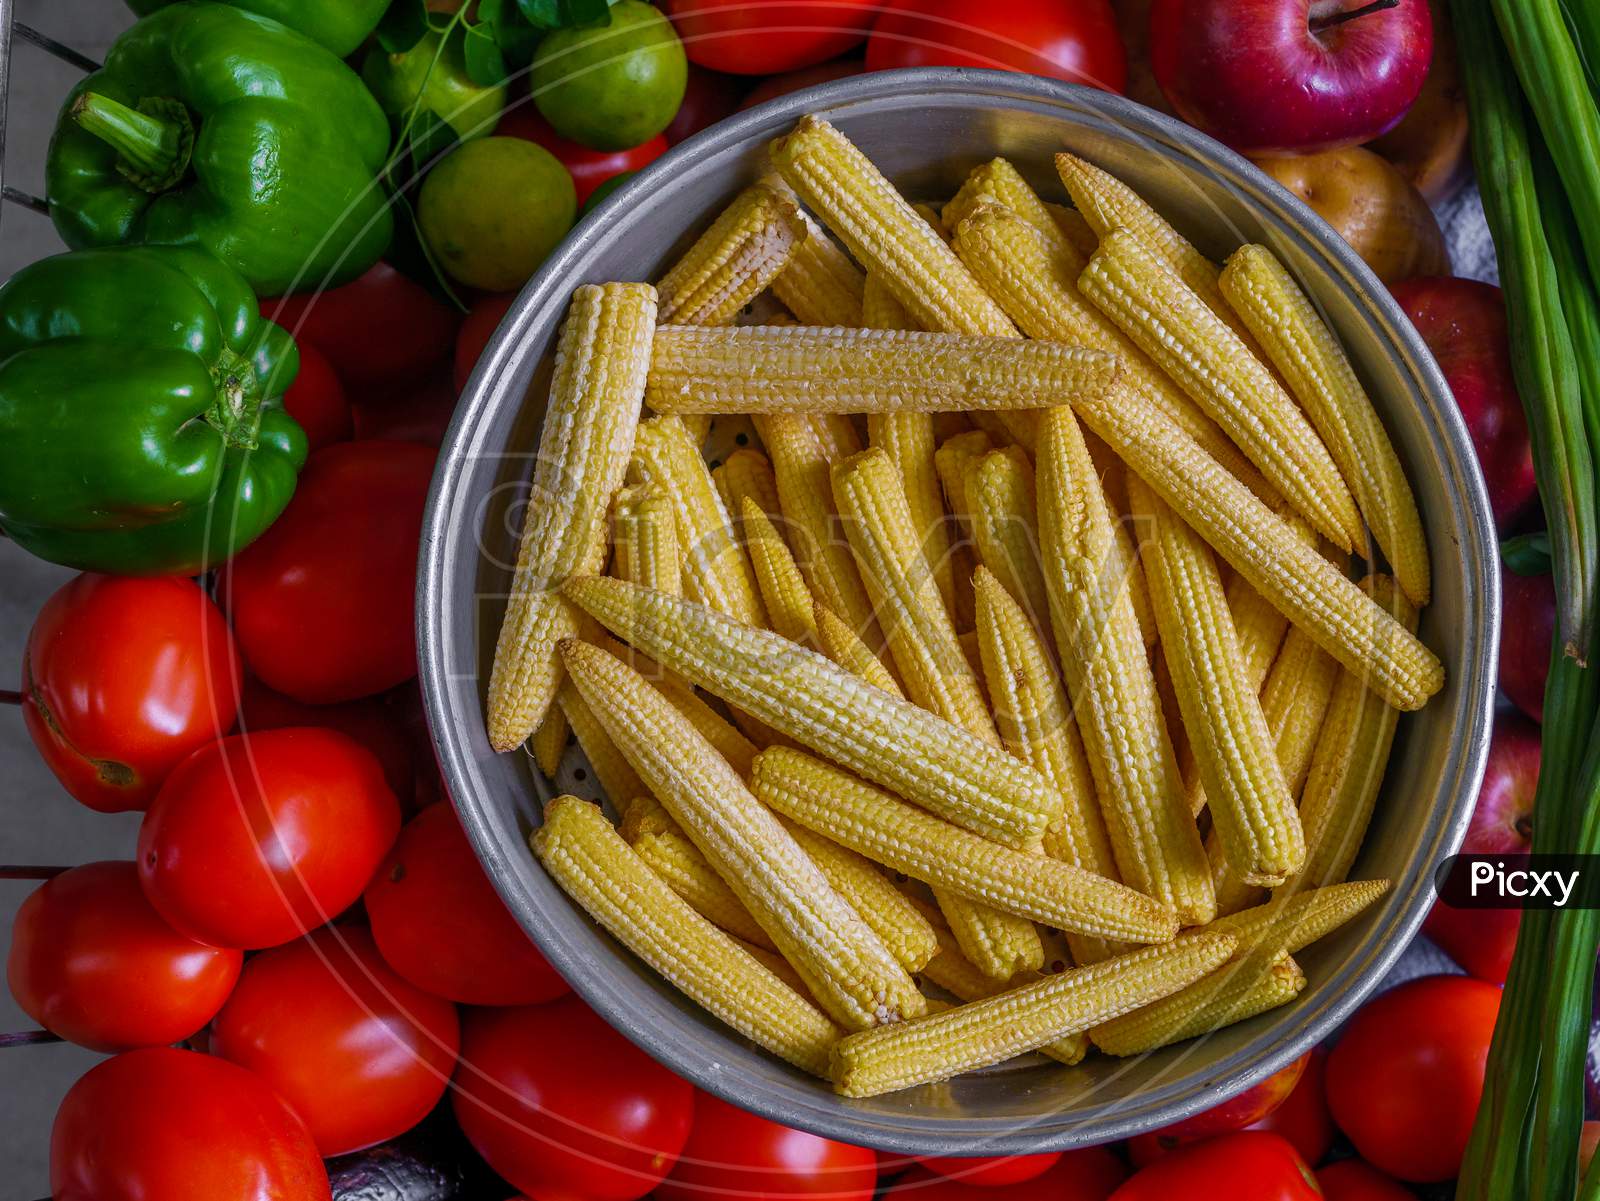 Baby Corns Arranged In A Basket With Tomatoes And Green Veggies In Background